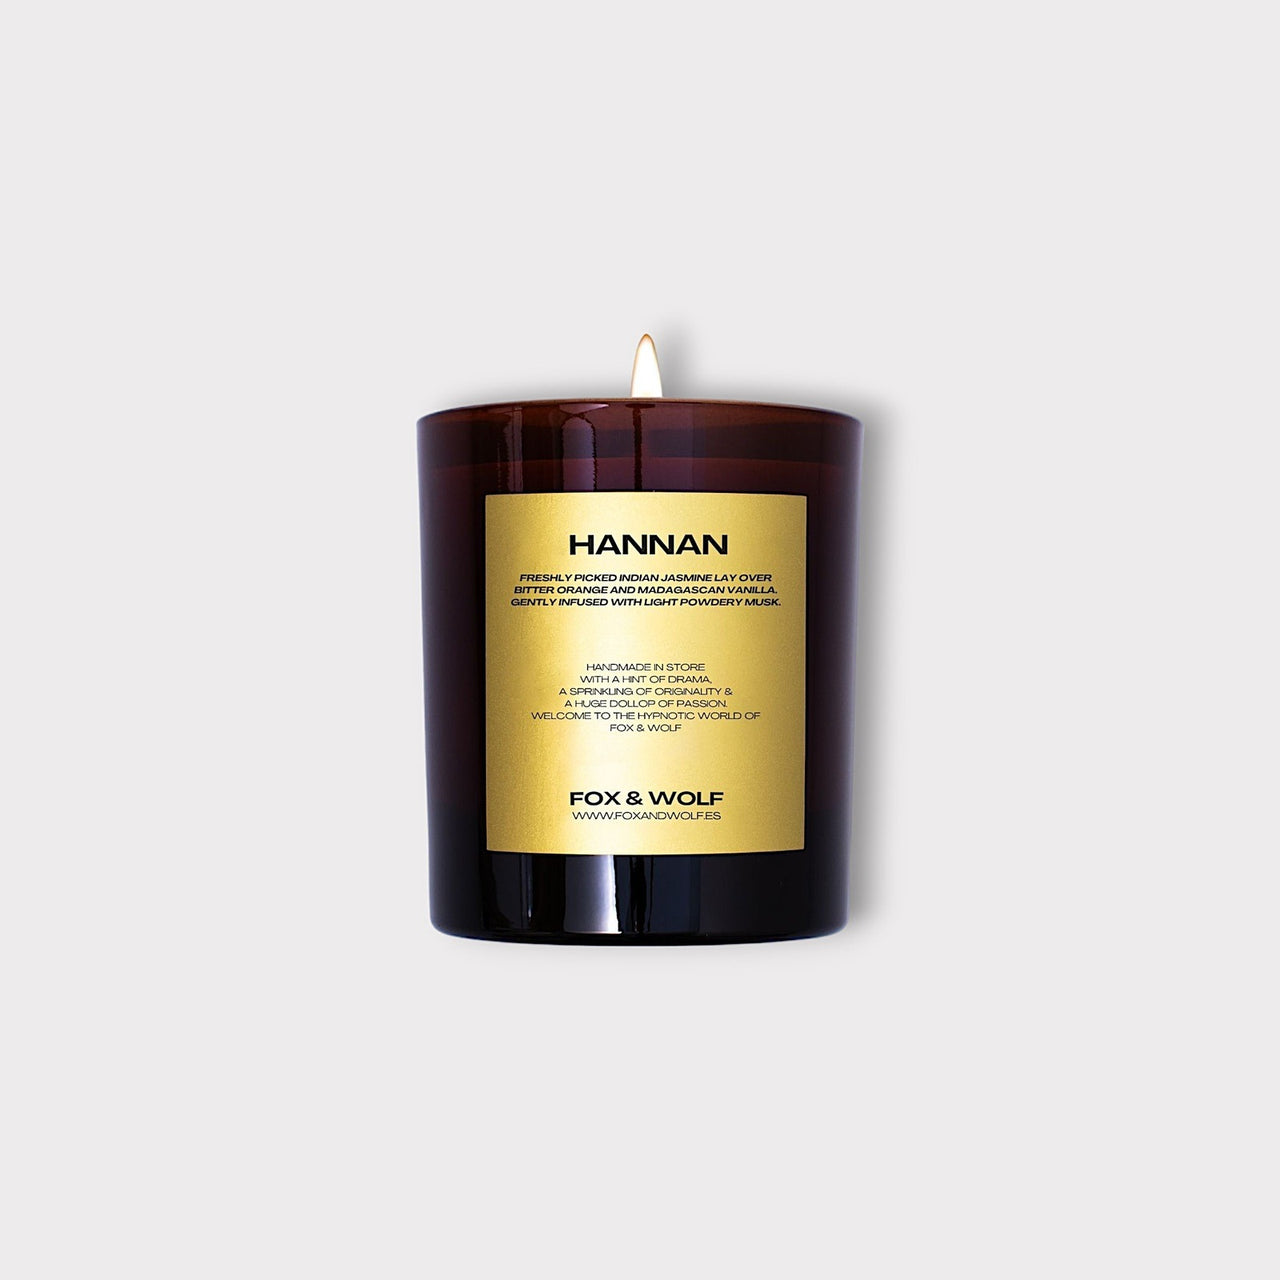 (300 G) HANNAN SCENTED CANDLE